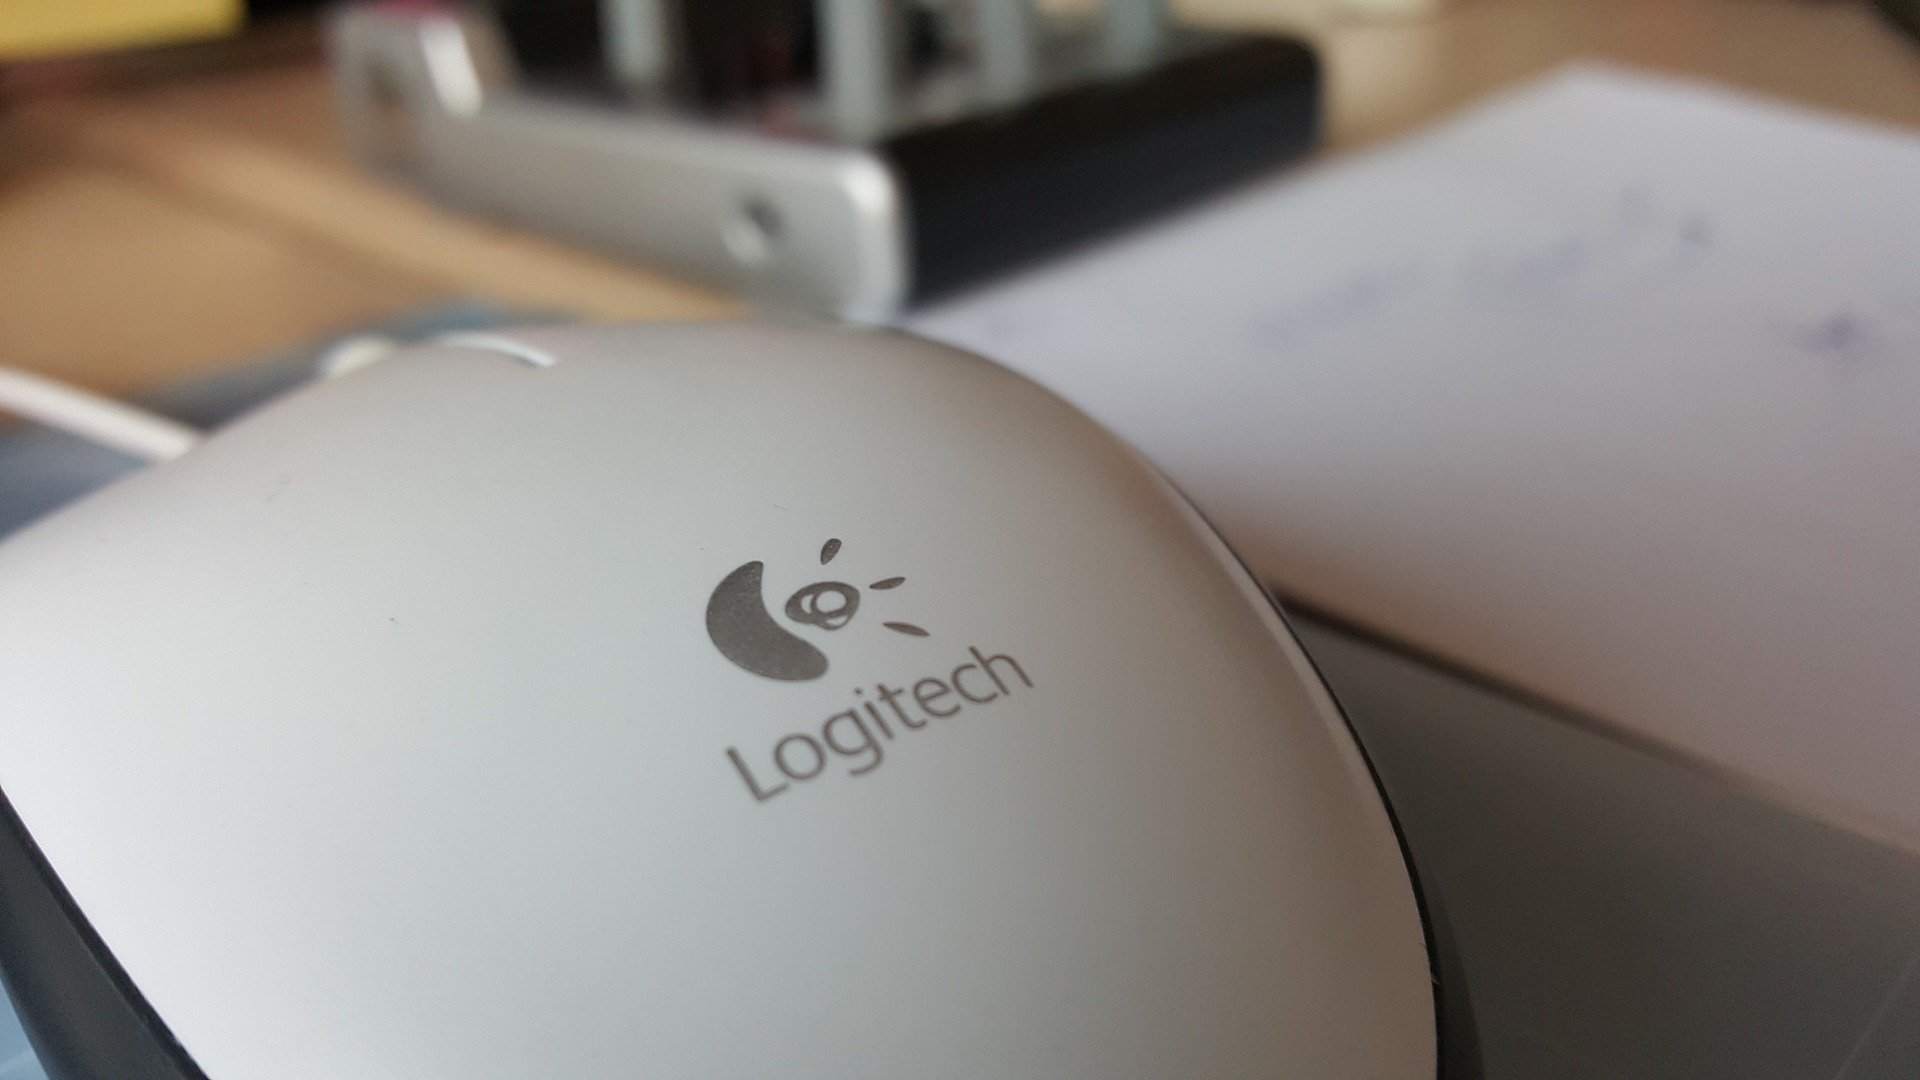 ASBIS starts supplying Logitech products to Russia